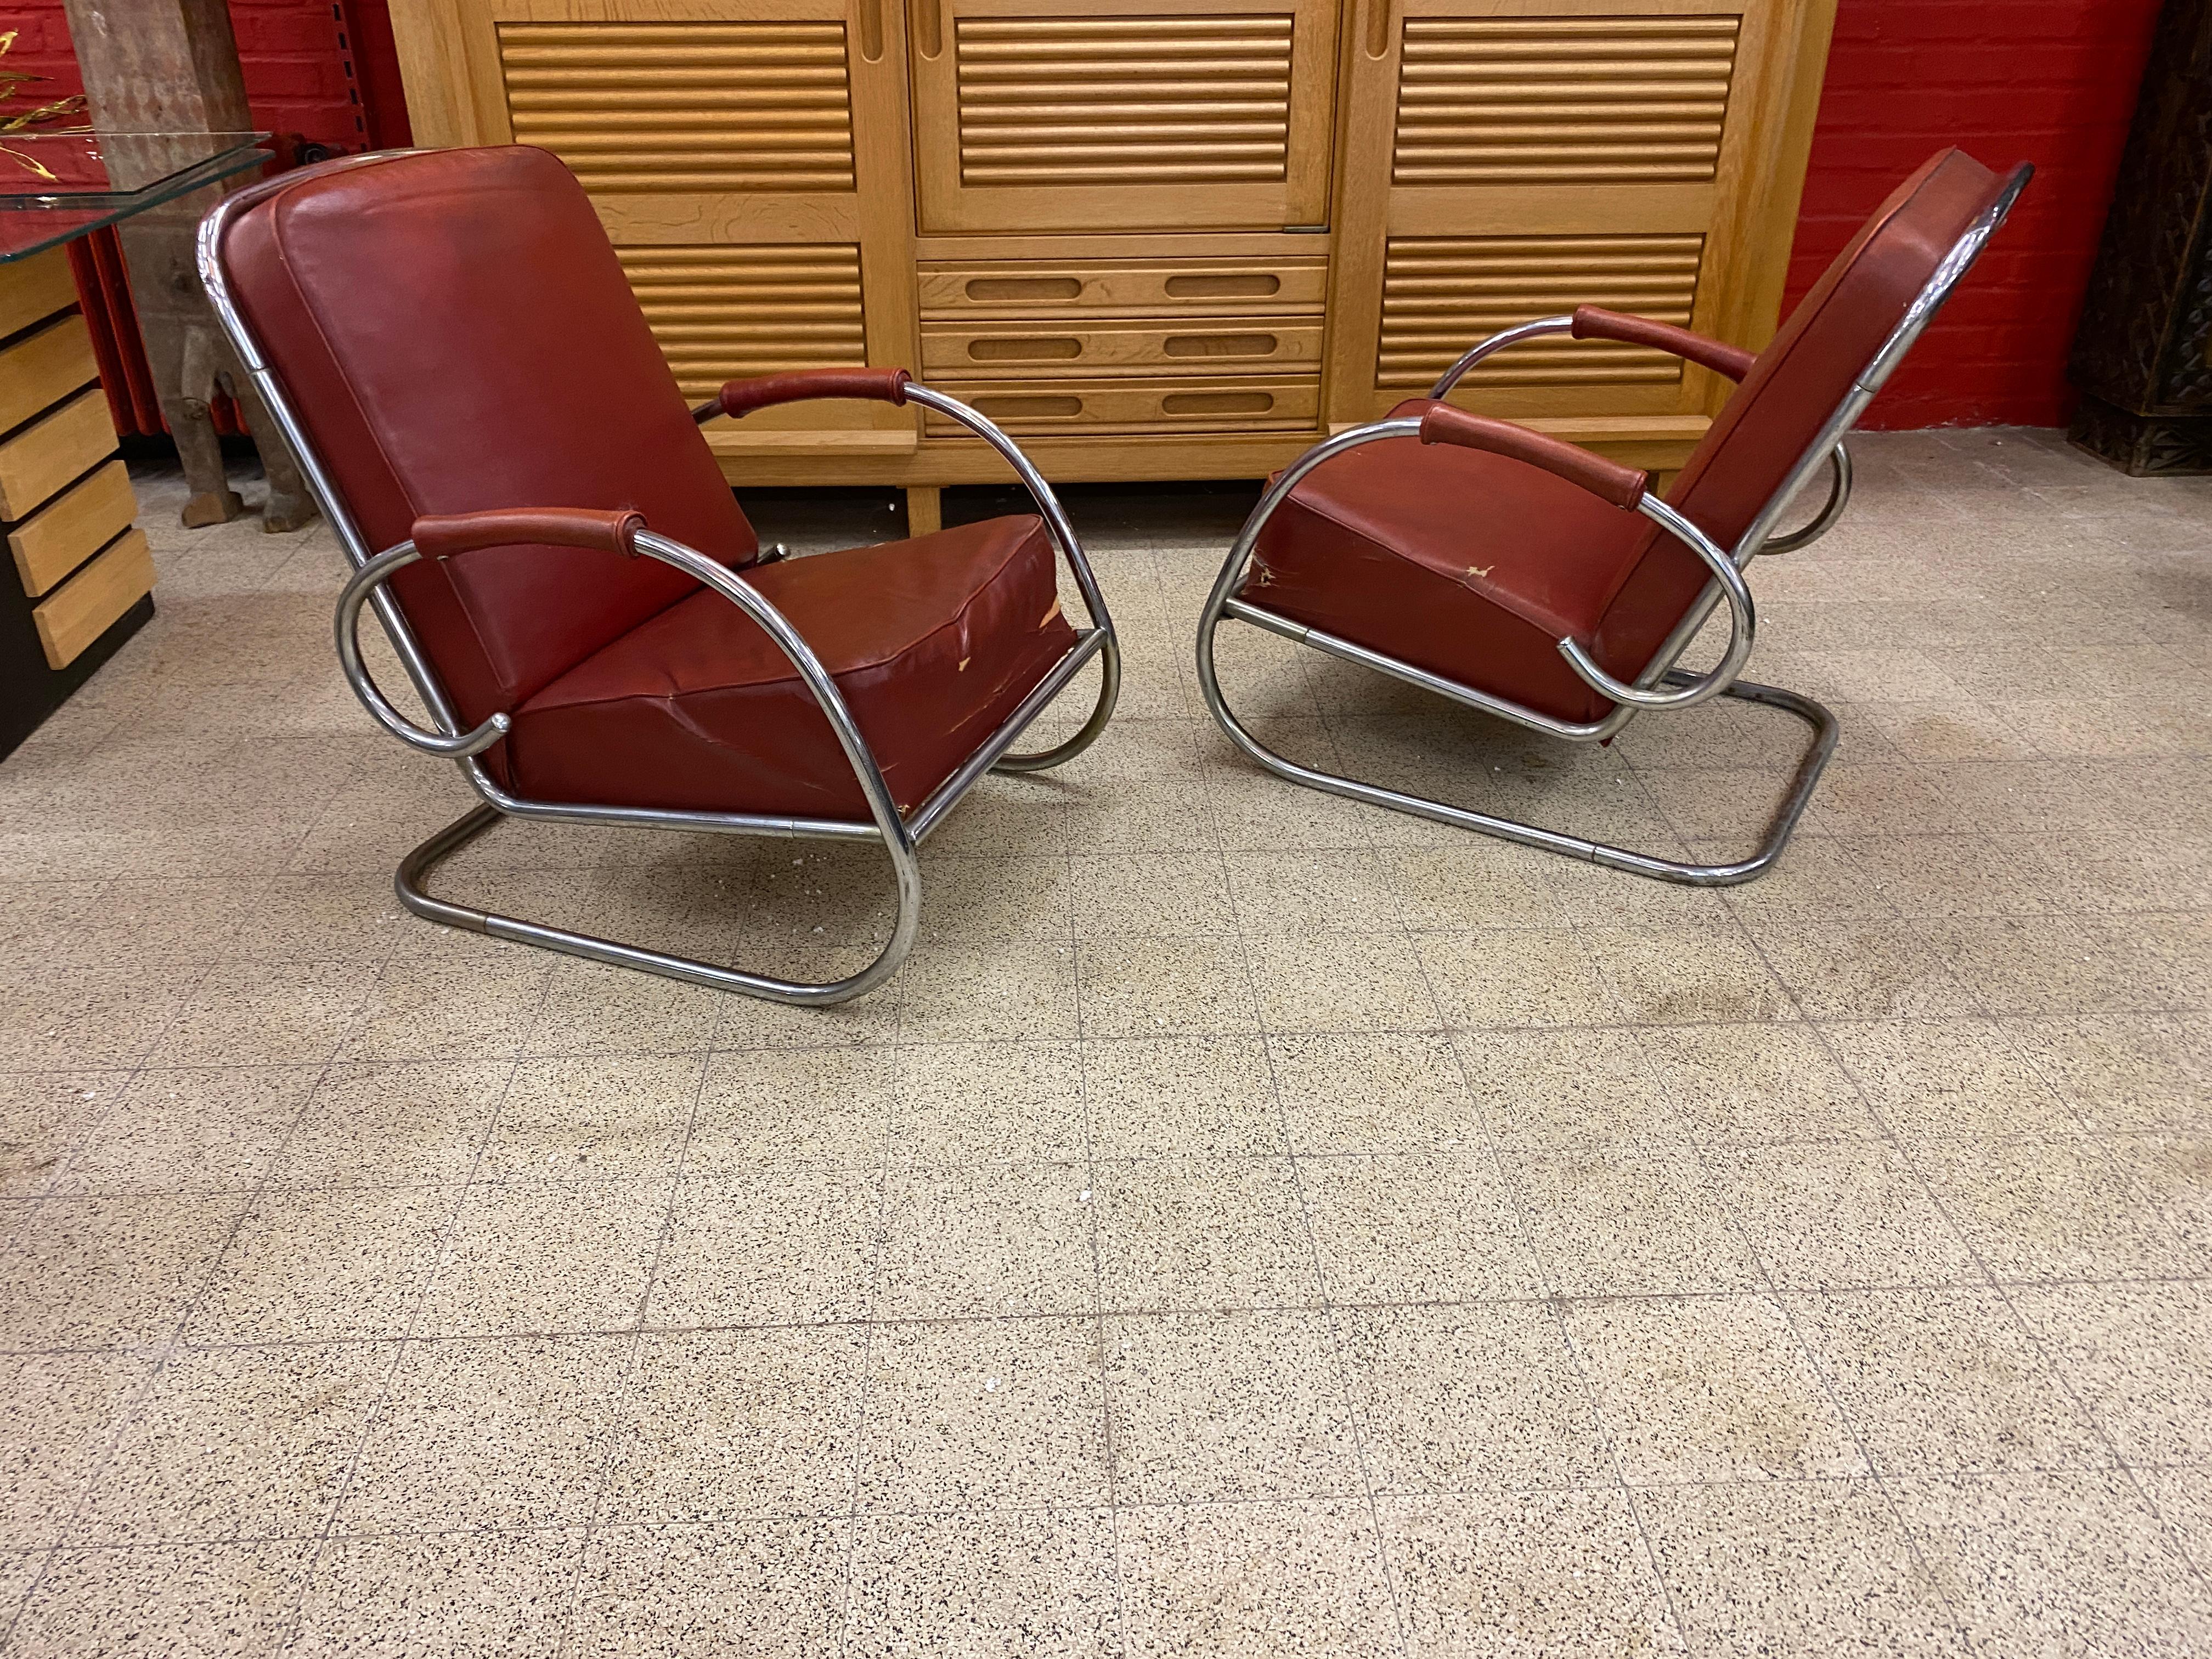 2 Modernist Art Deco Armchairs in Chromed Metal and Faux Leather circa 1920-1930 For Sale 5